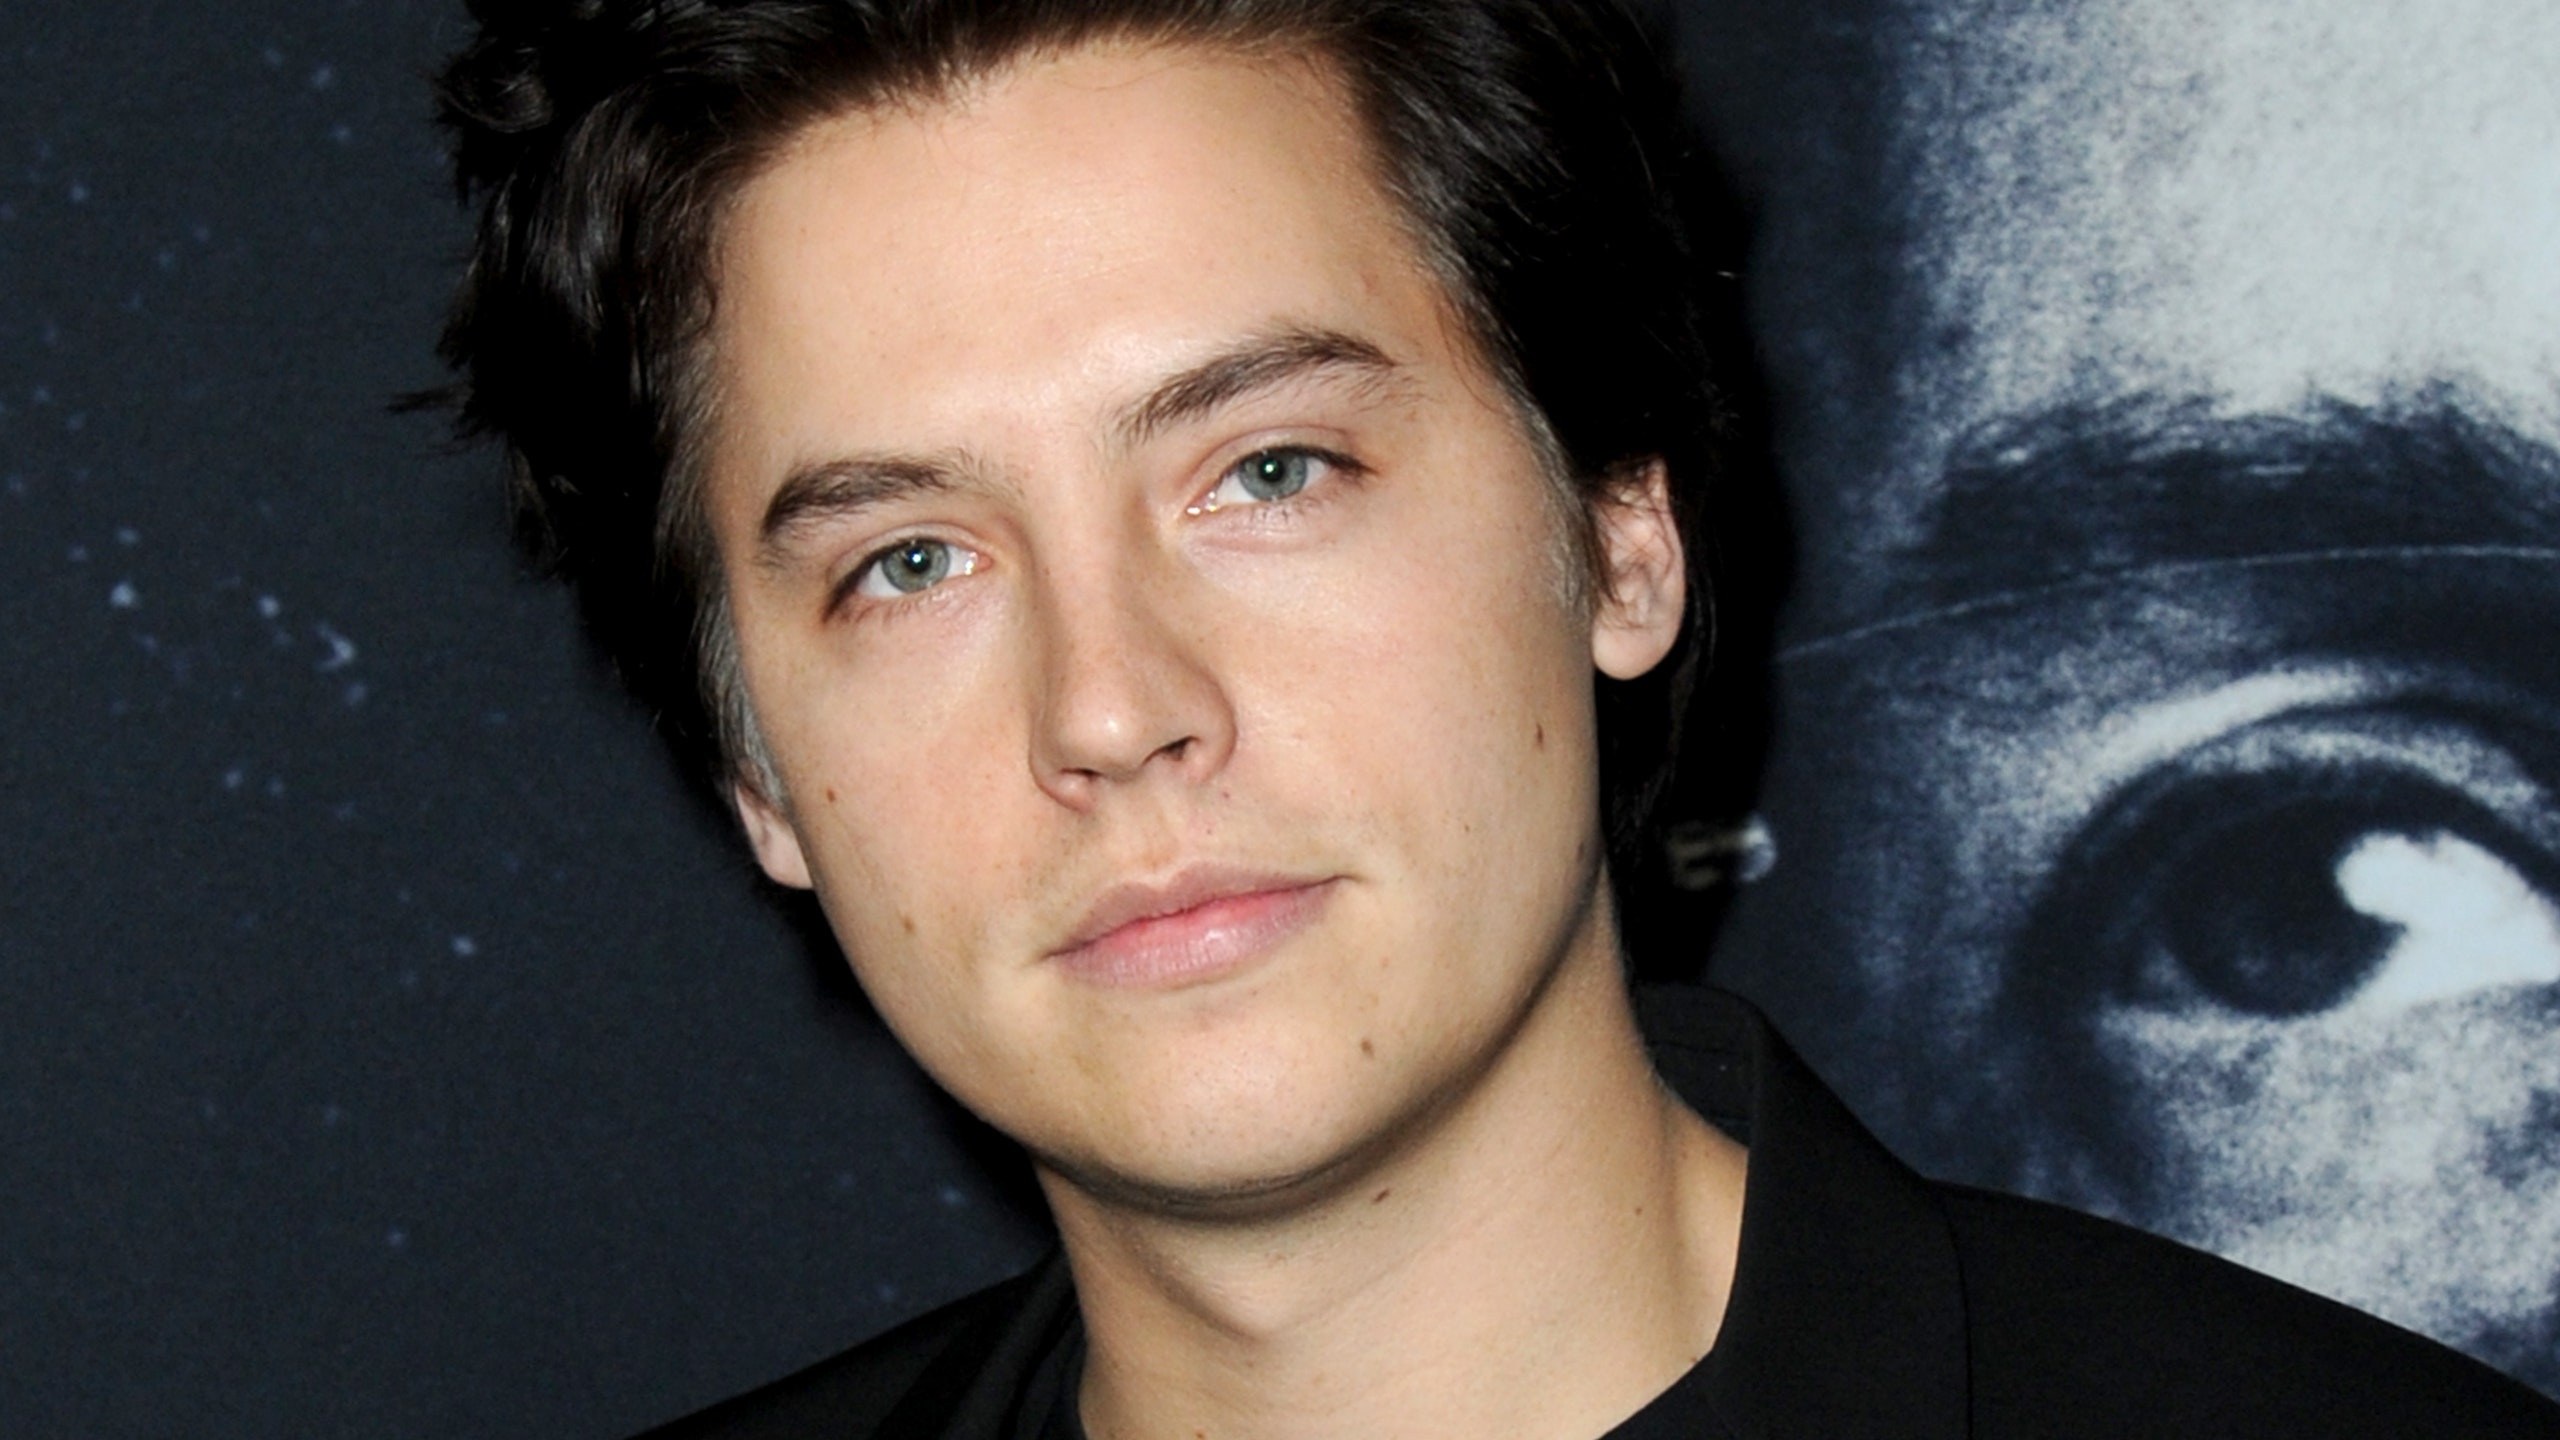 Cole Sprouse TV Shows, Latest news about TV series and movies, Entertainment, 2560x1440 HD Desktop